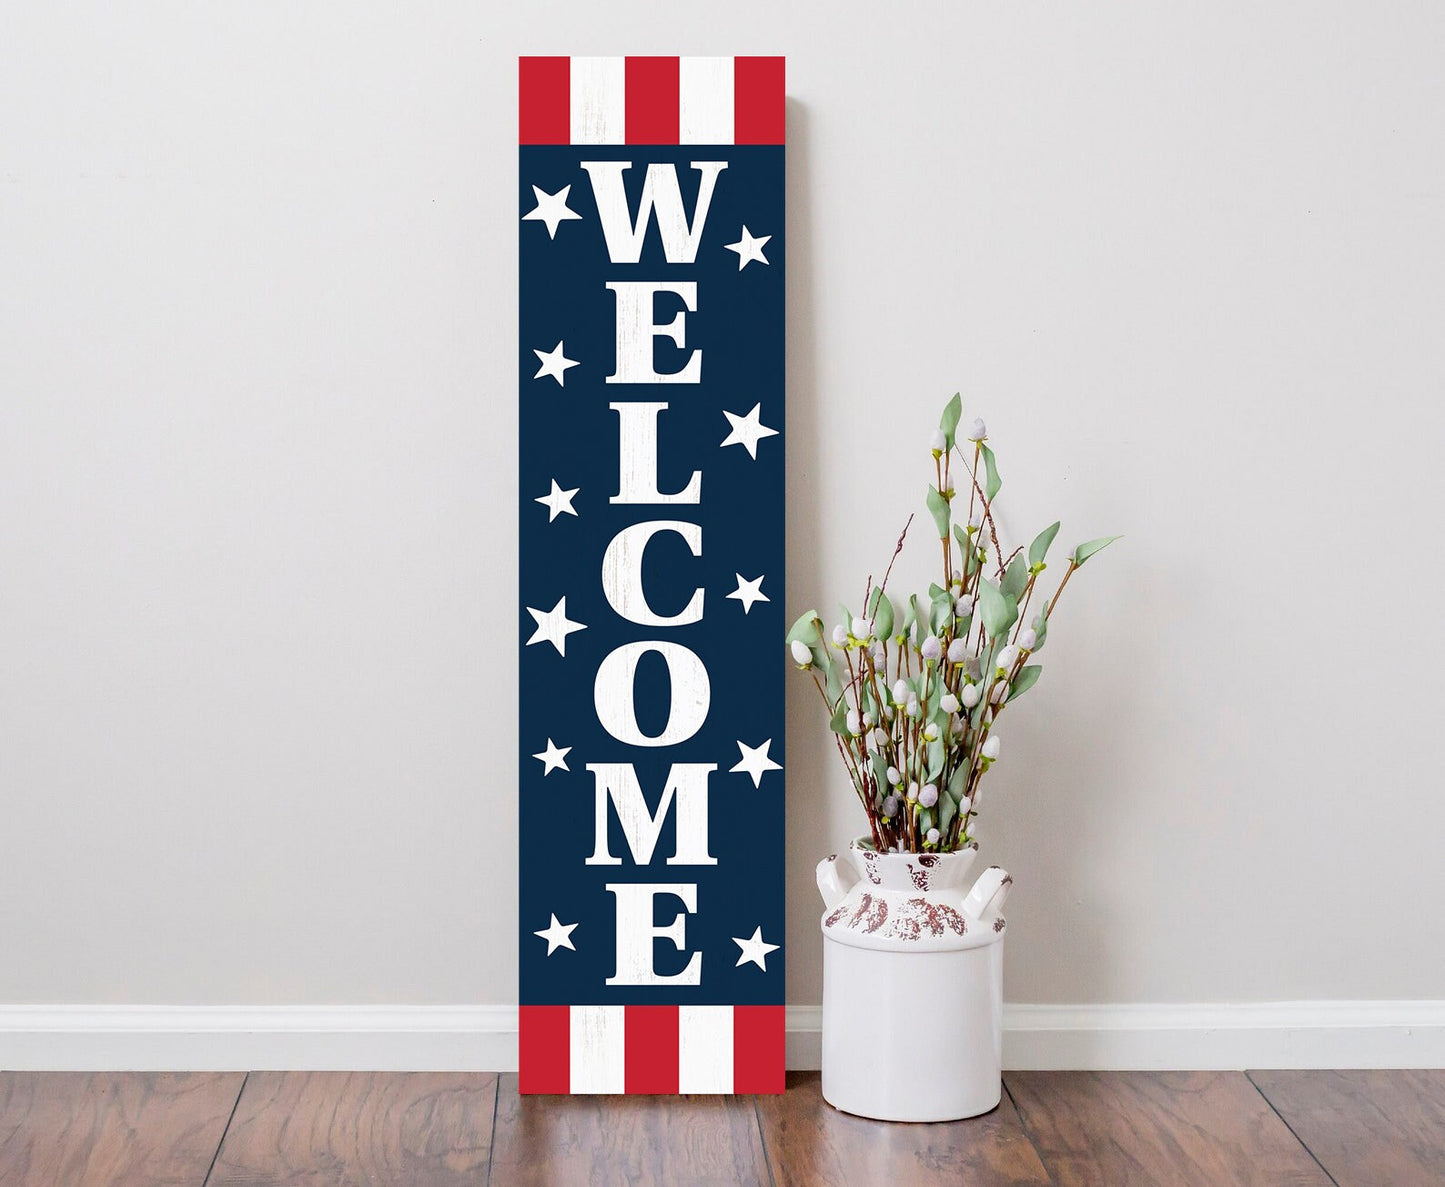 36in "Welcome" 4th of July Porch Sign - Vibrant & Patriotic Front Door Decor for Independence Day Festivities